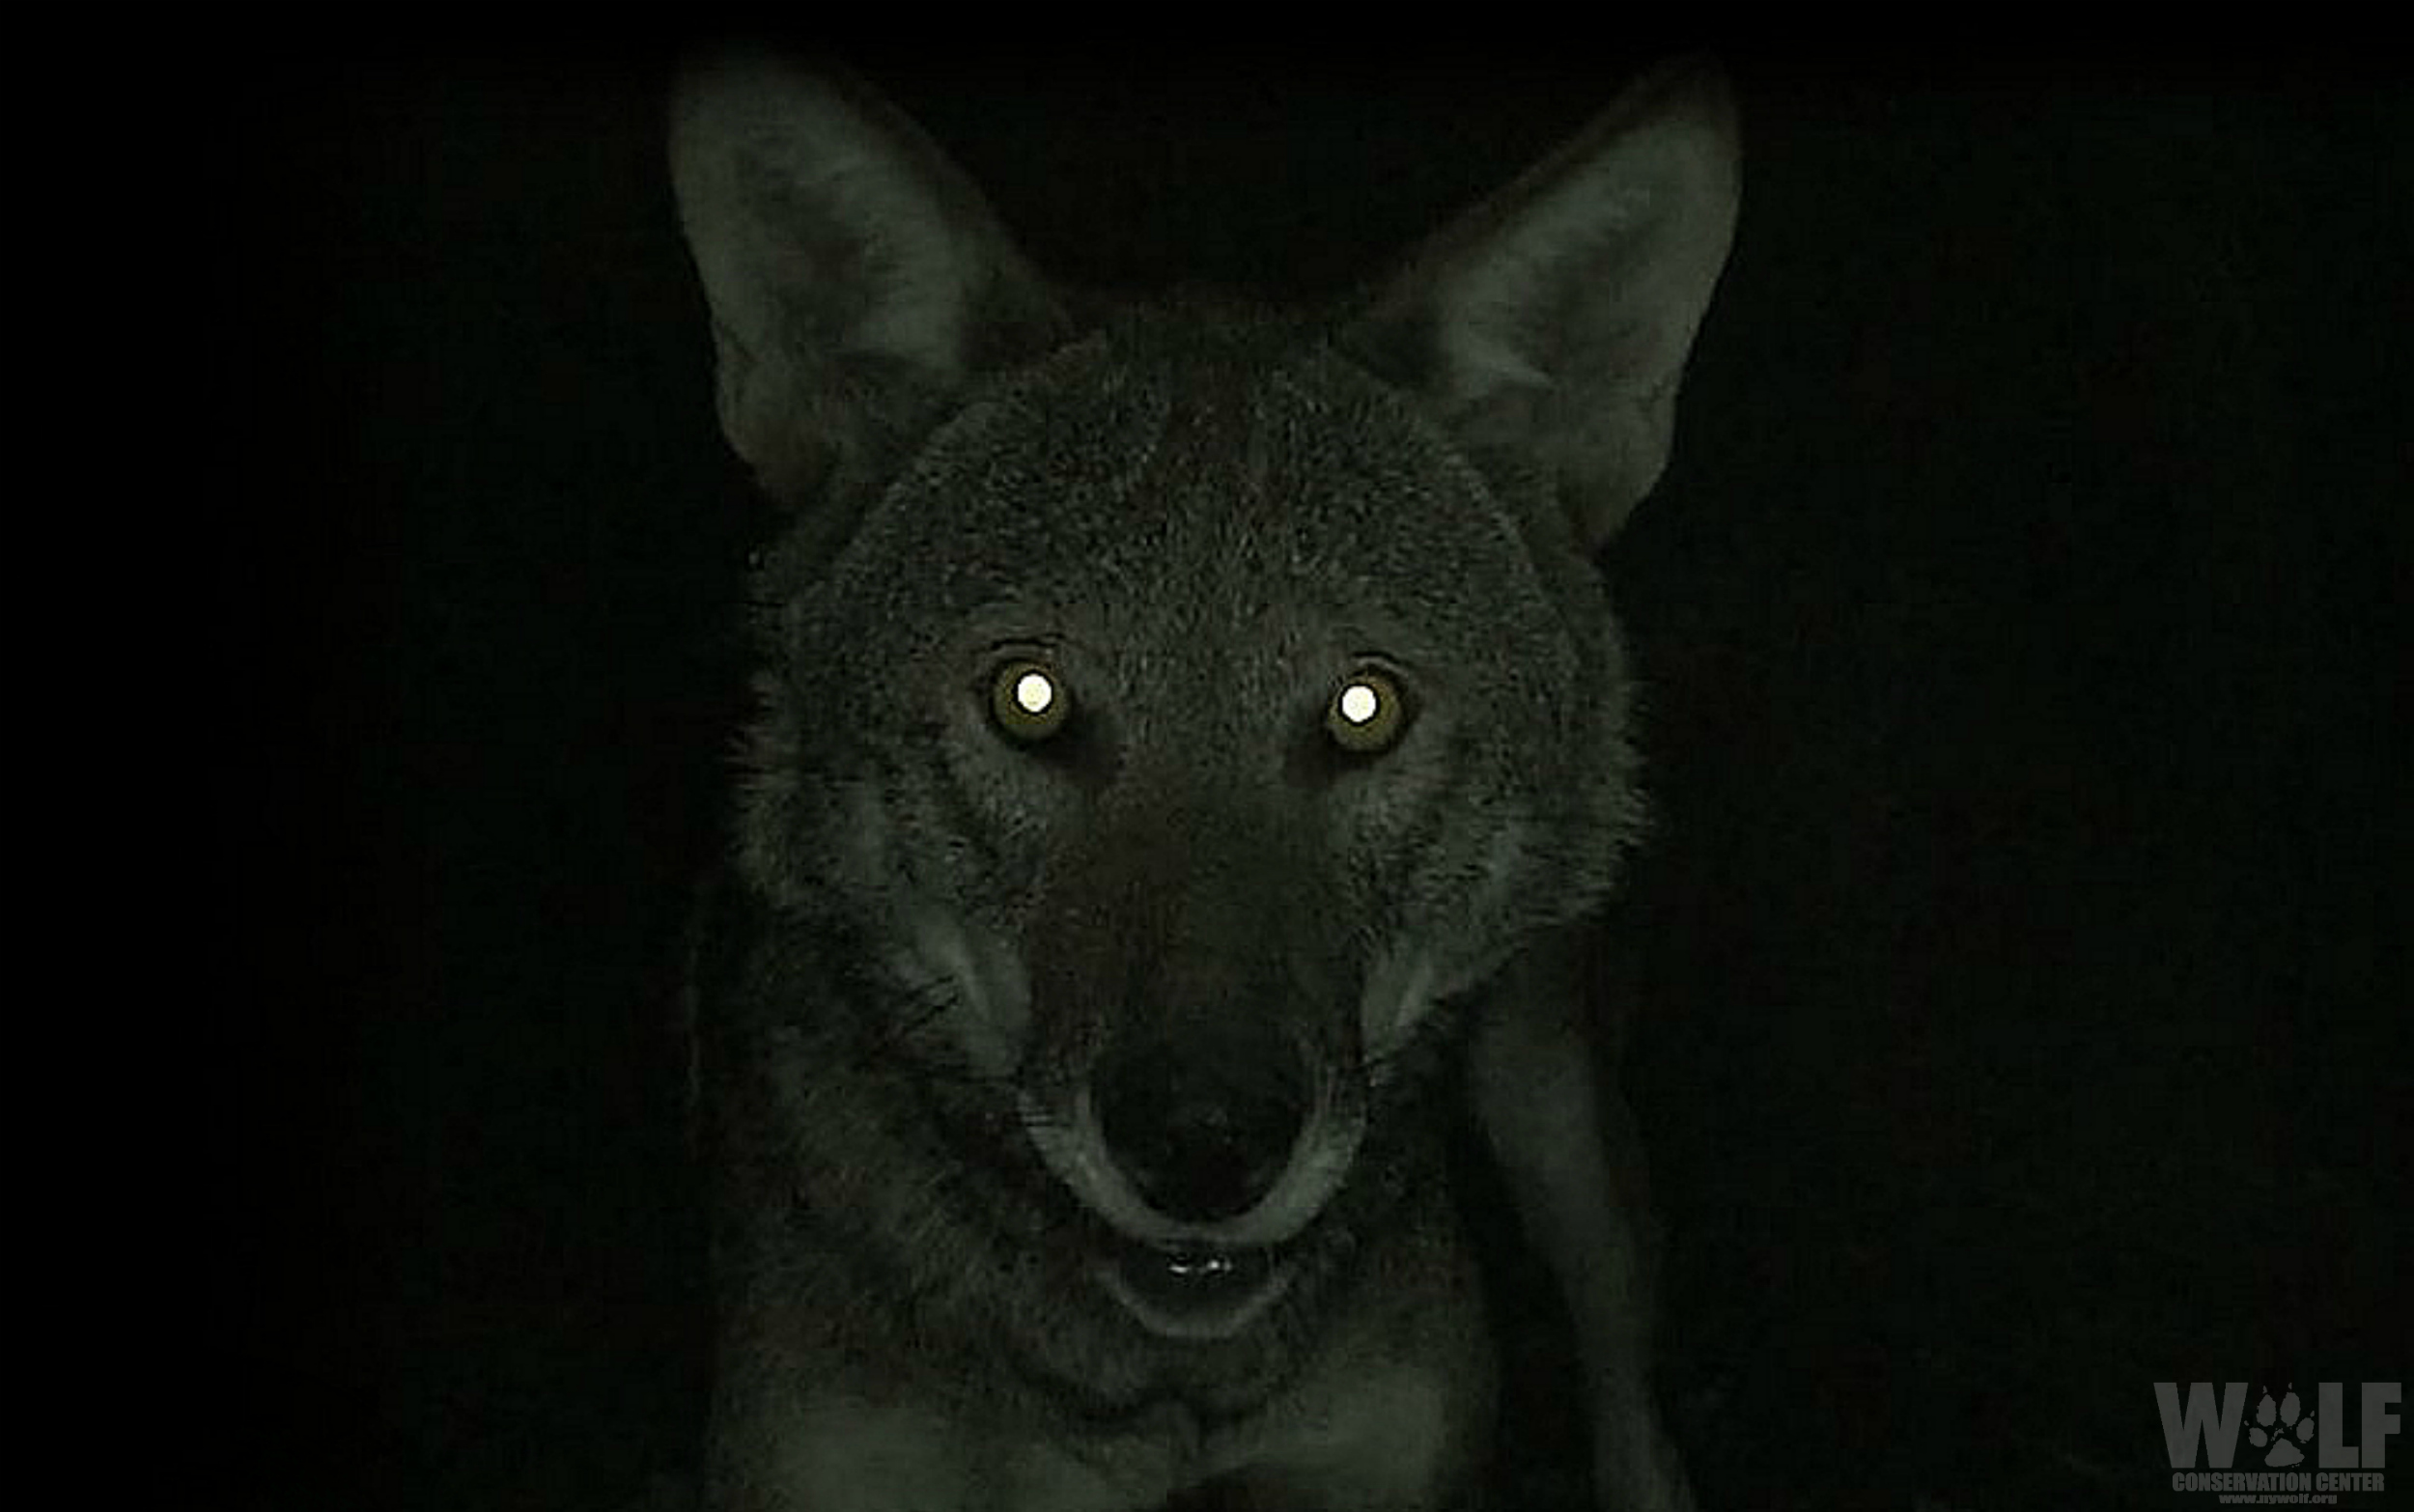 Why Do Wolves' Eyes Glow in the Dark   Wolf Conservation Center